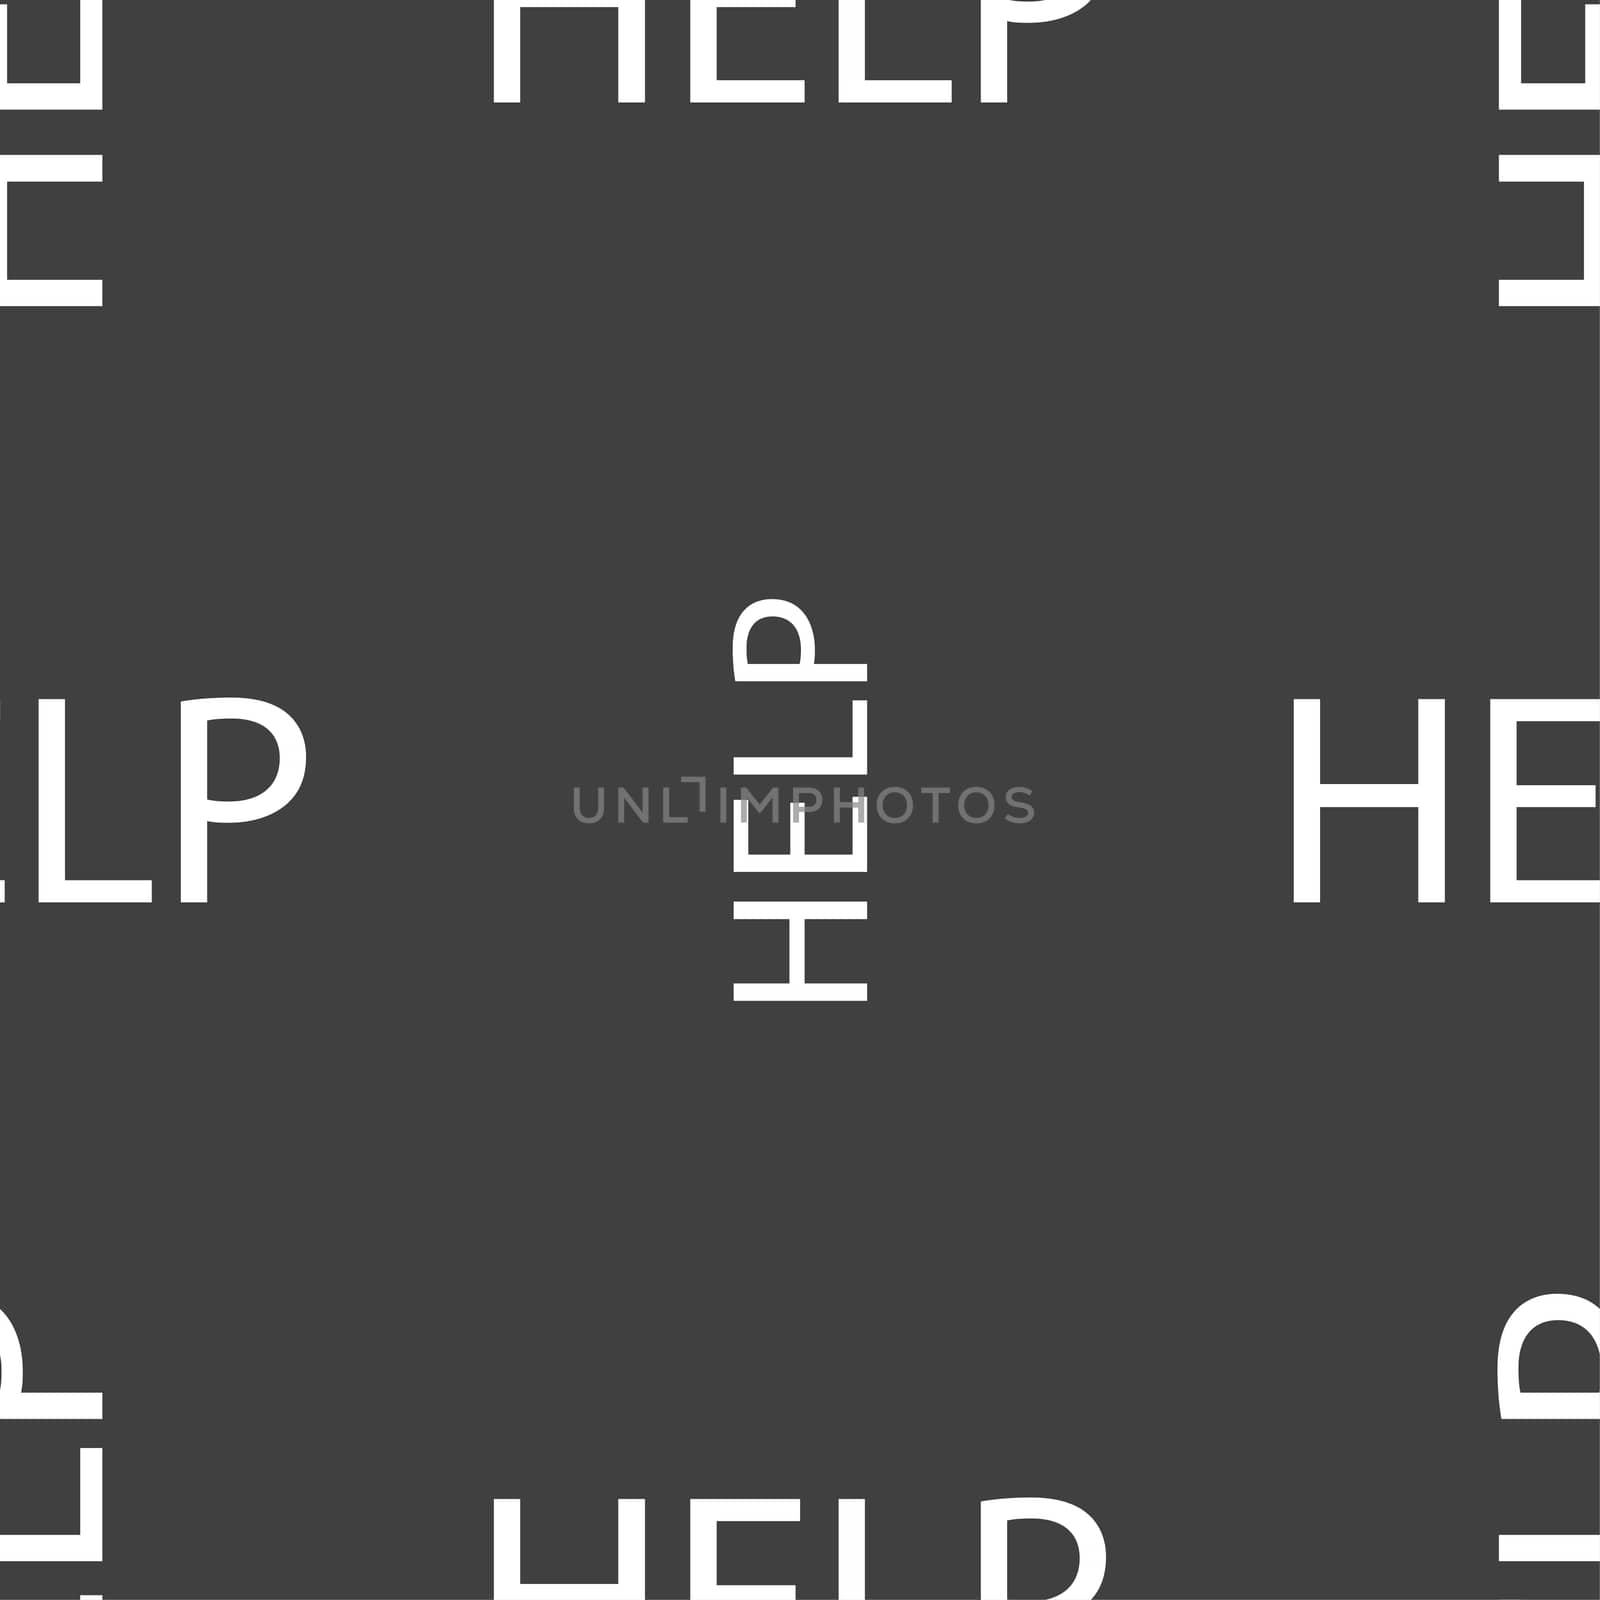 Help point sign icon. Question symbol. Seamless pattern on a gray background. illustration